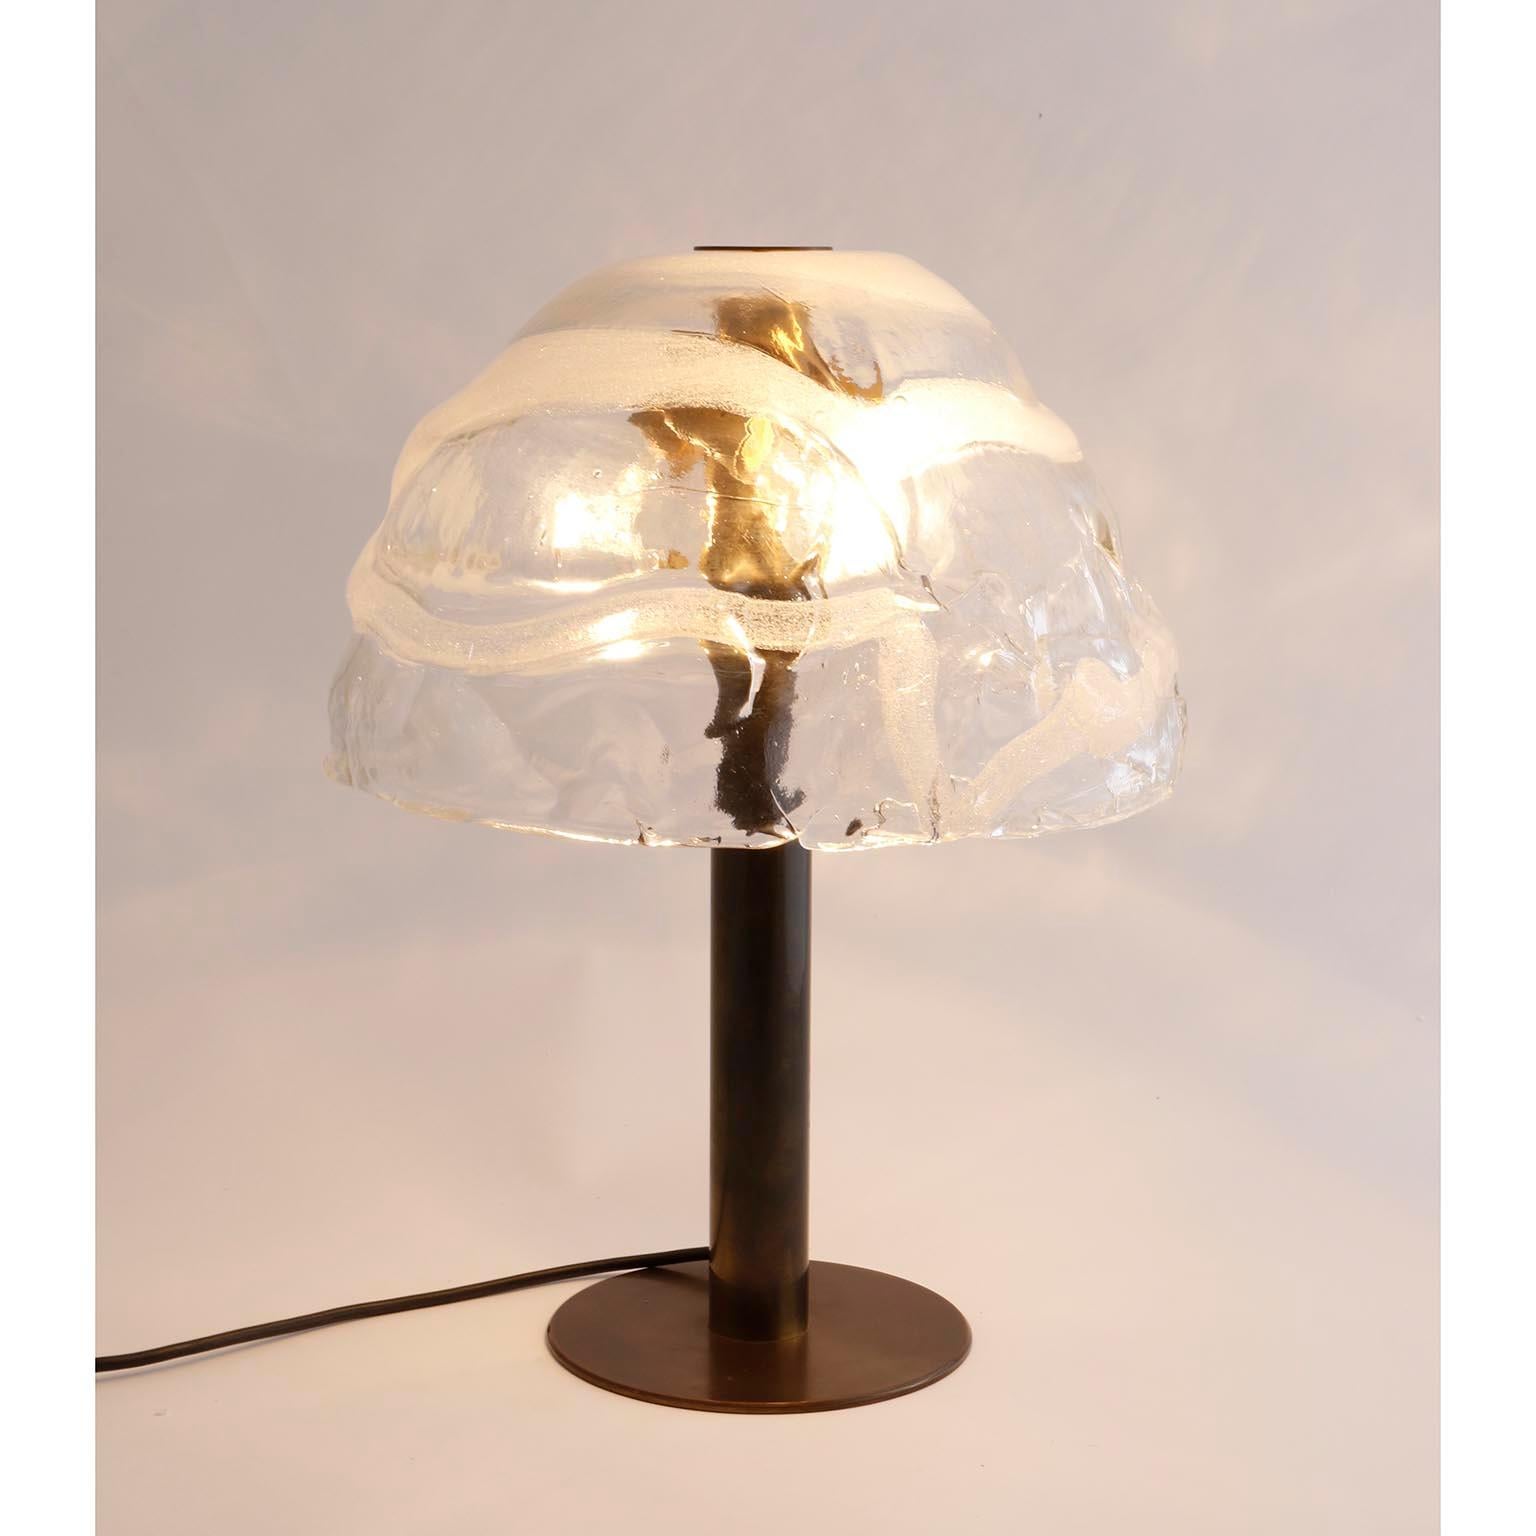 Late 20th Century Kalmar Table Lamp Model 'Dom', Murano Glass Shade Patinated Brass, 1970s